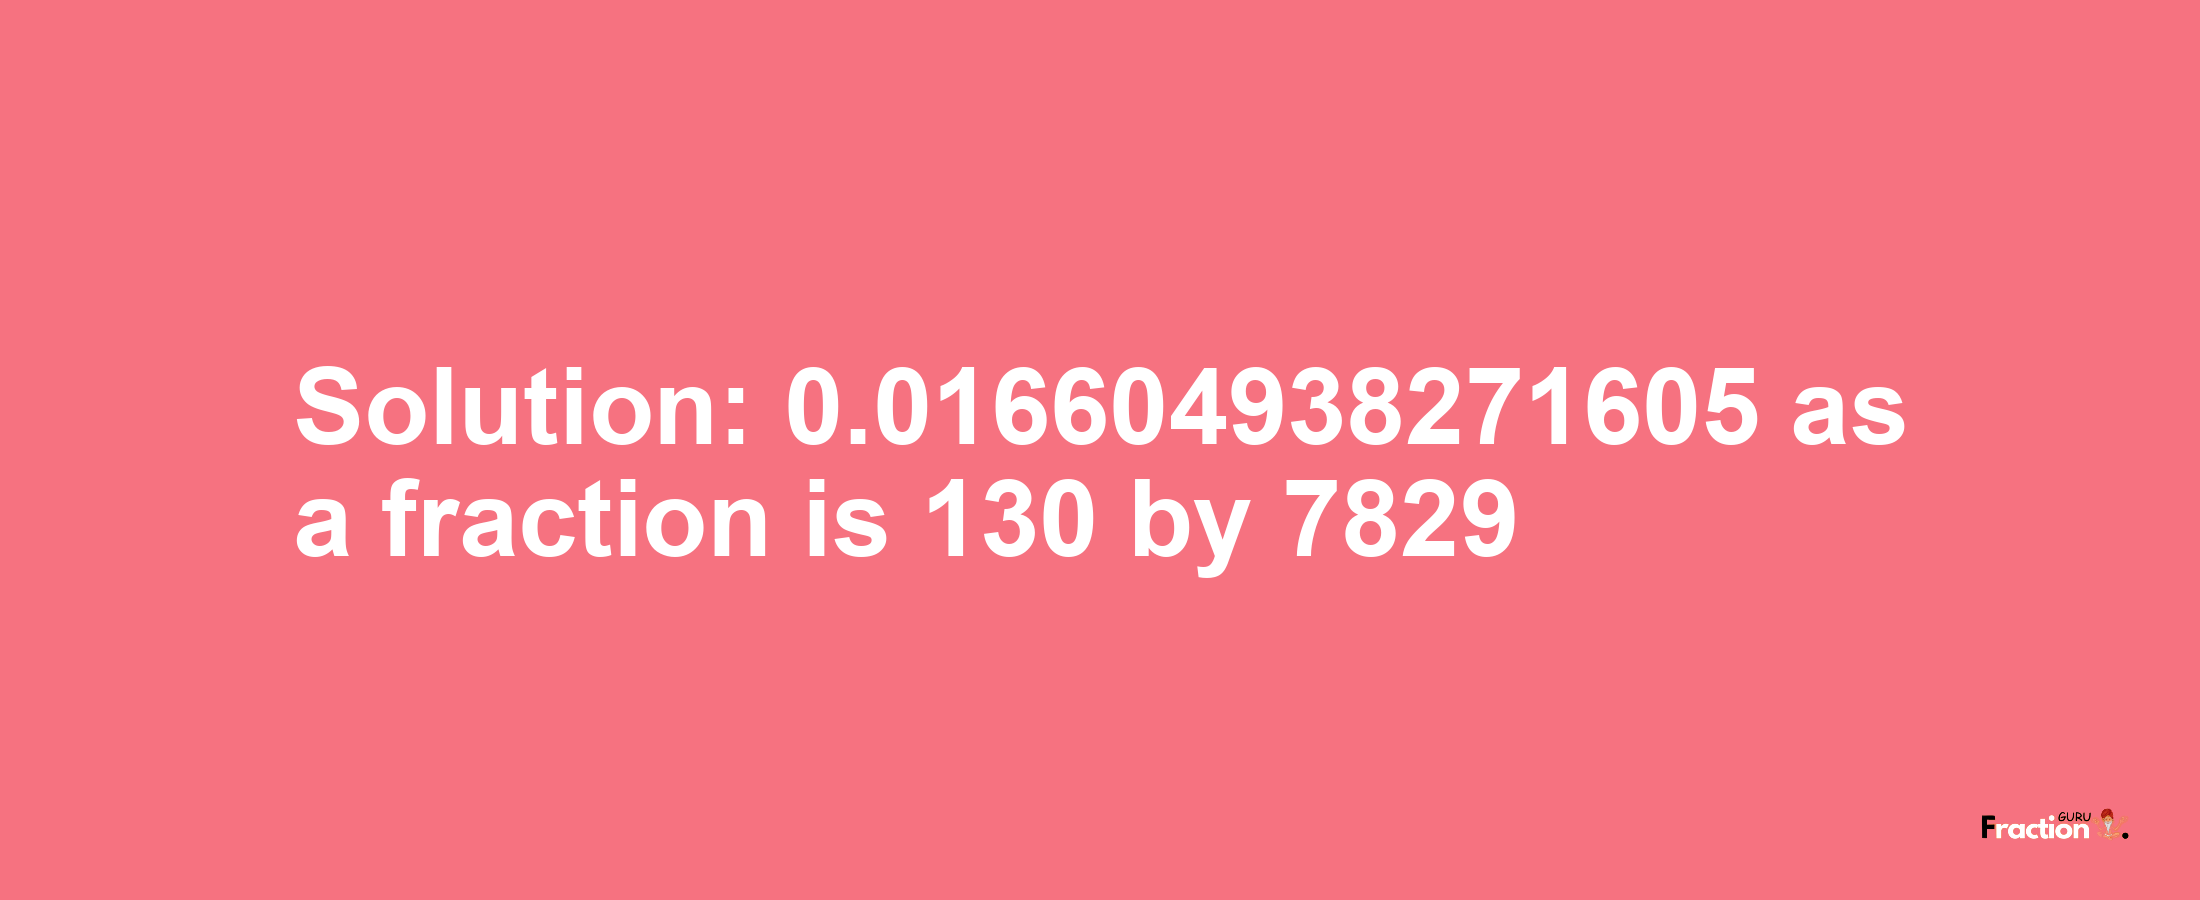 Solution:0.016604938271605 as a fraction is 130/7829